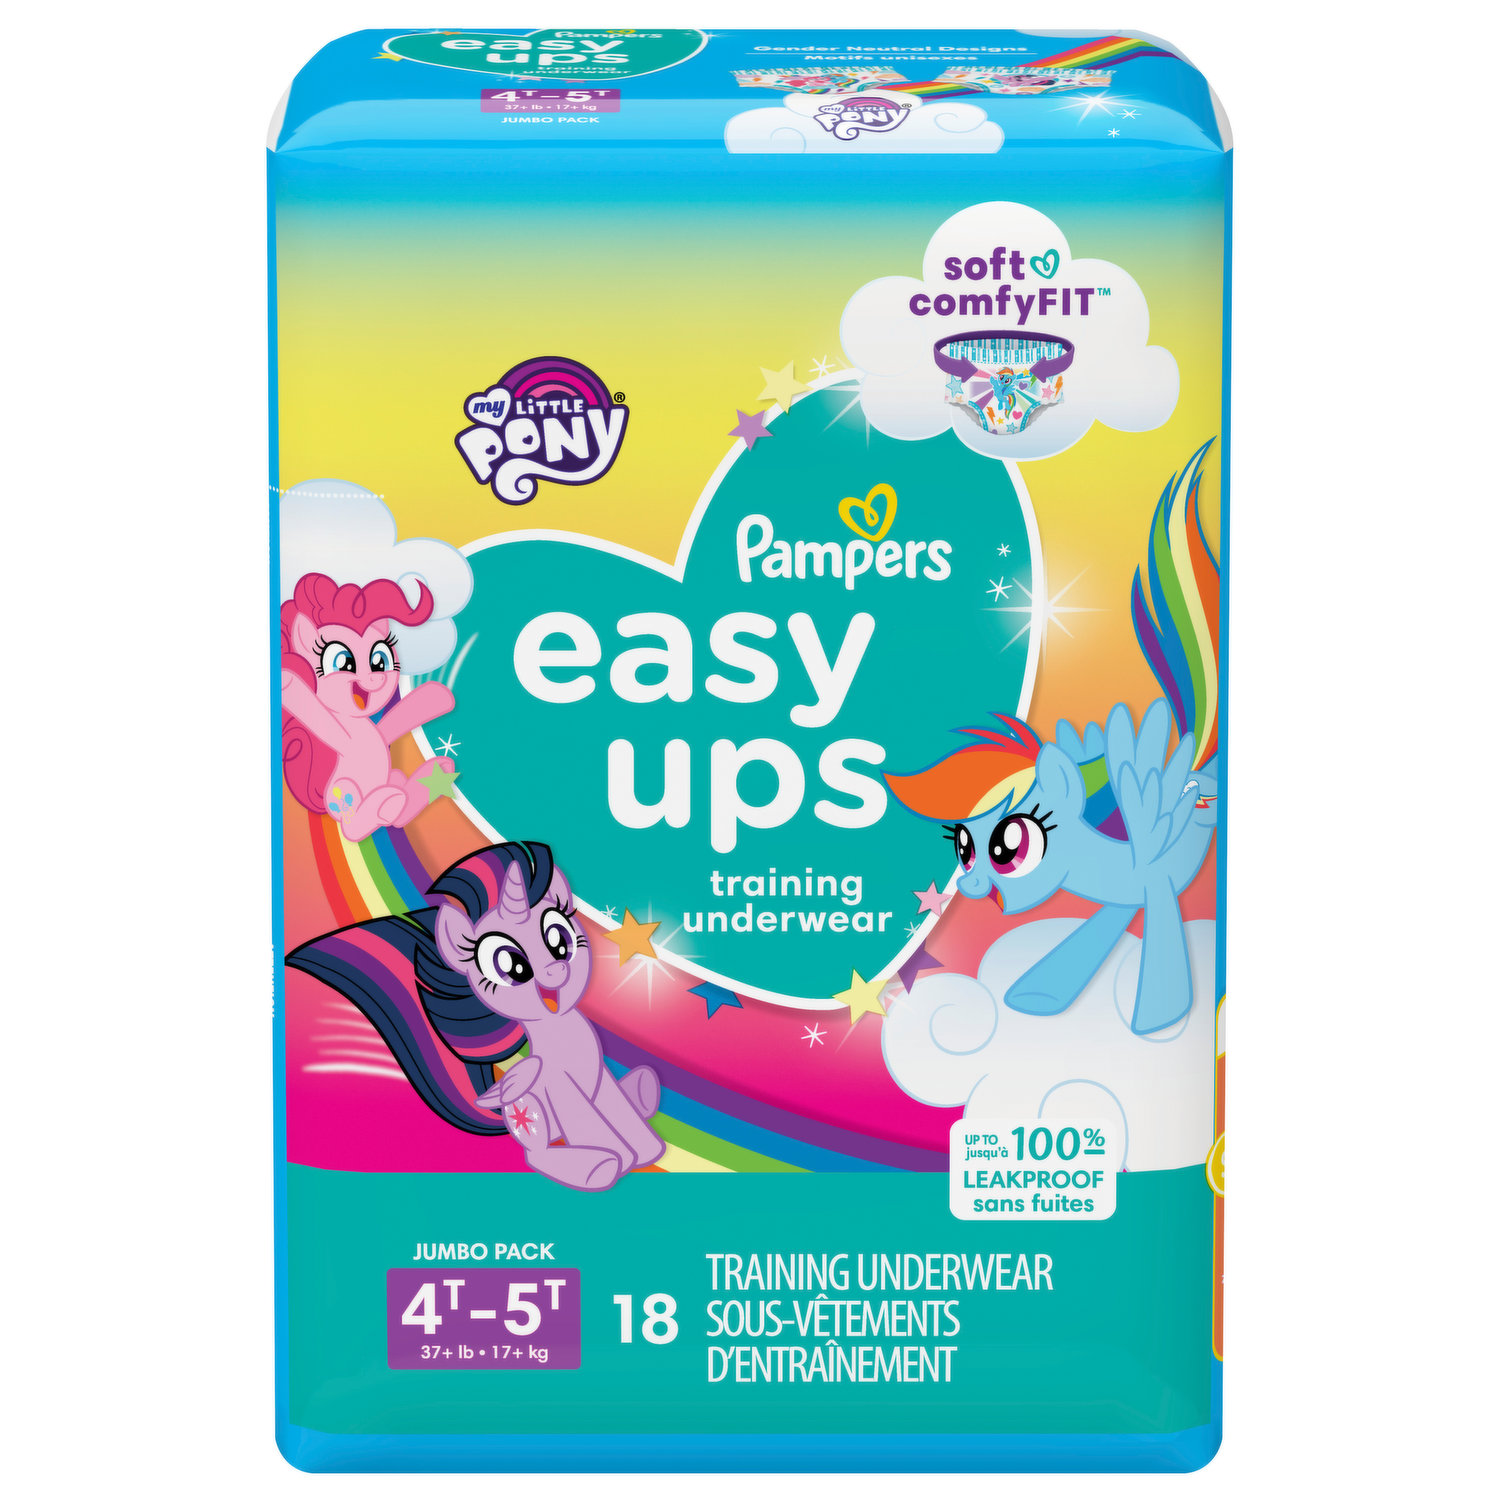 Pampers Training Underwear, 4T-5T (37+ lb), My Little Pony, Jumbo Pack -  Super 1 Foods